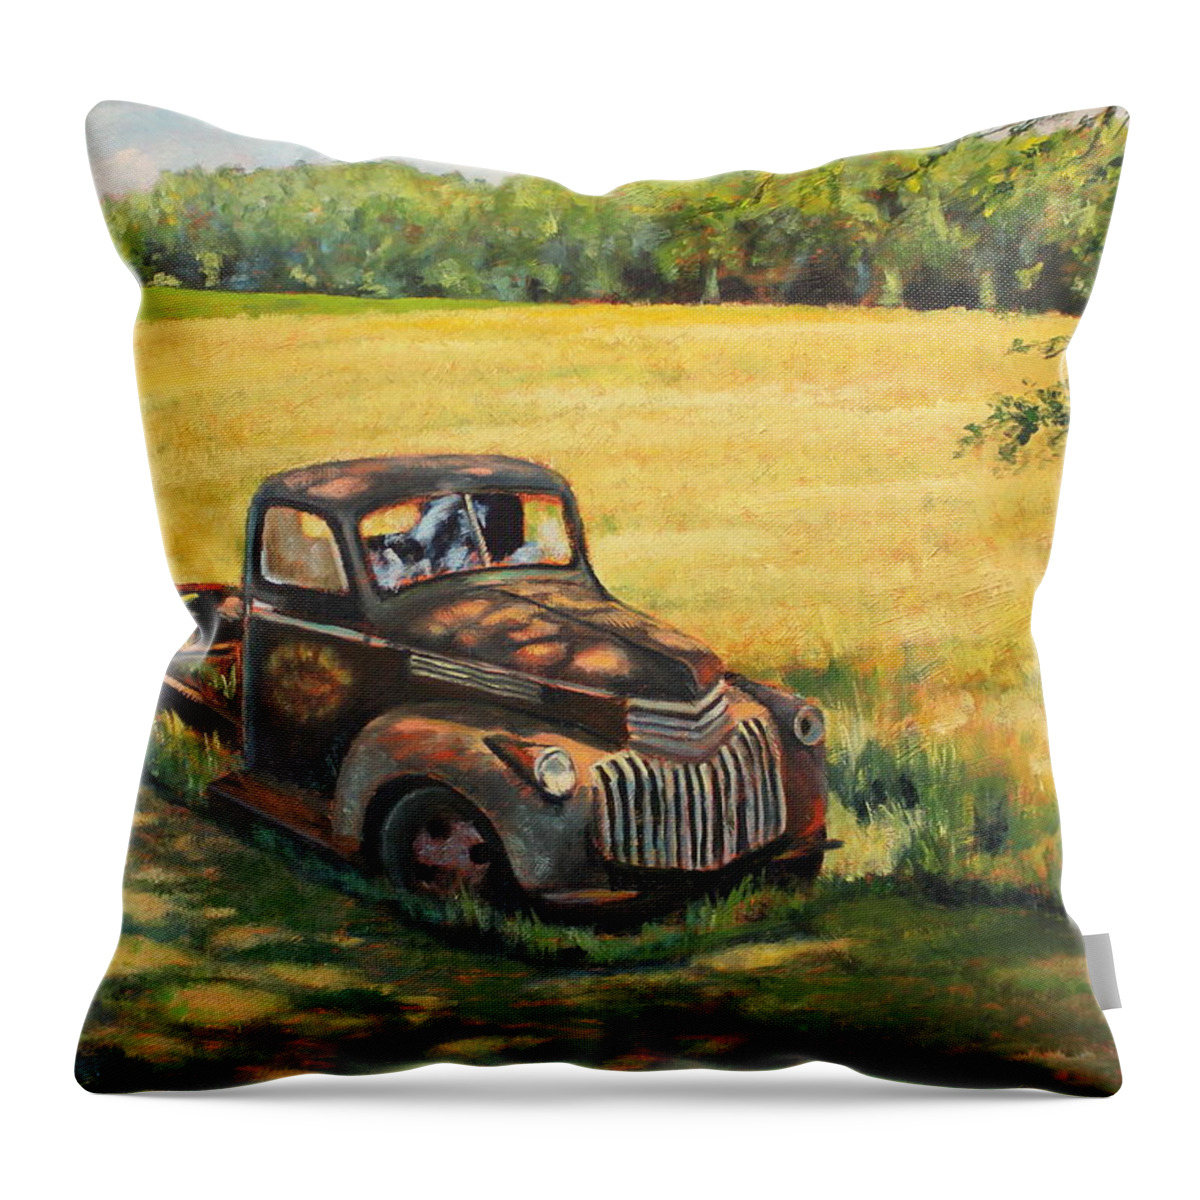 Truck Throw Pillow featuring the painting A spot in the shade by Daniel W Green